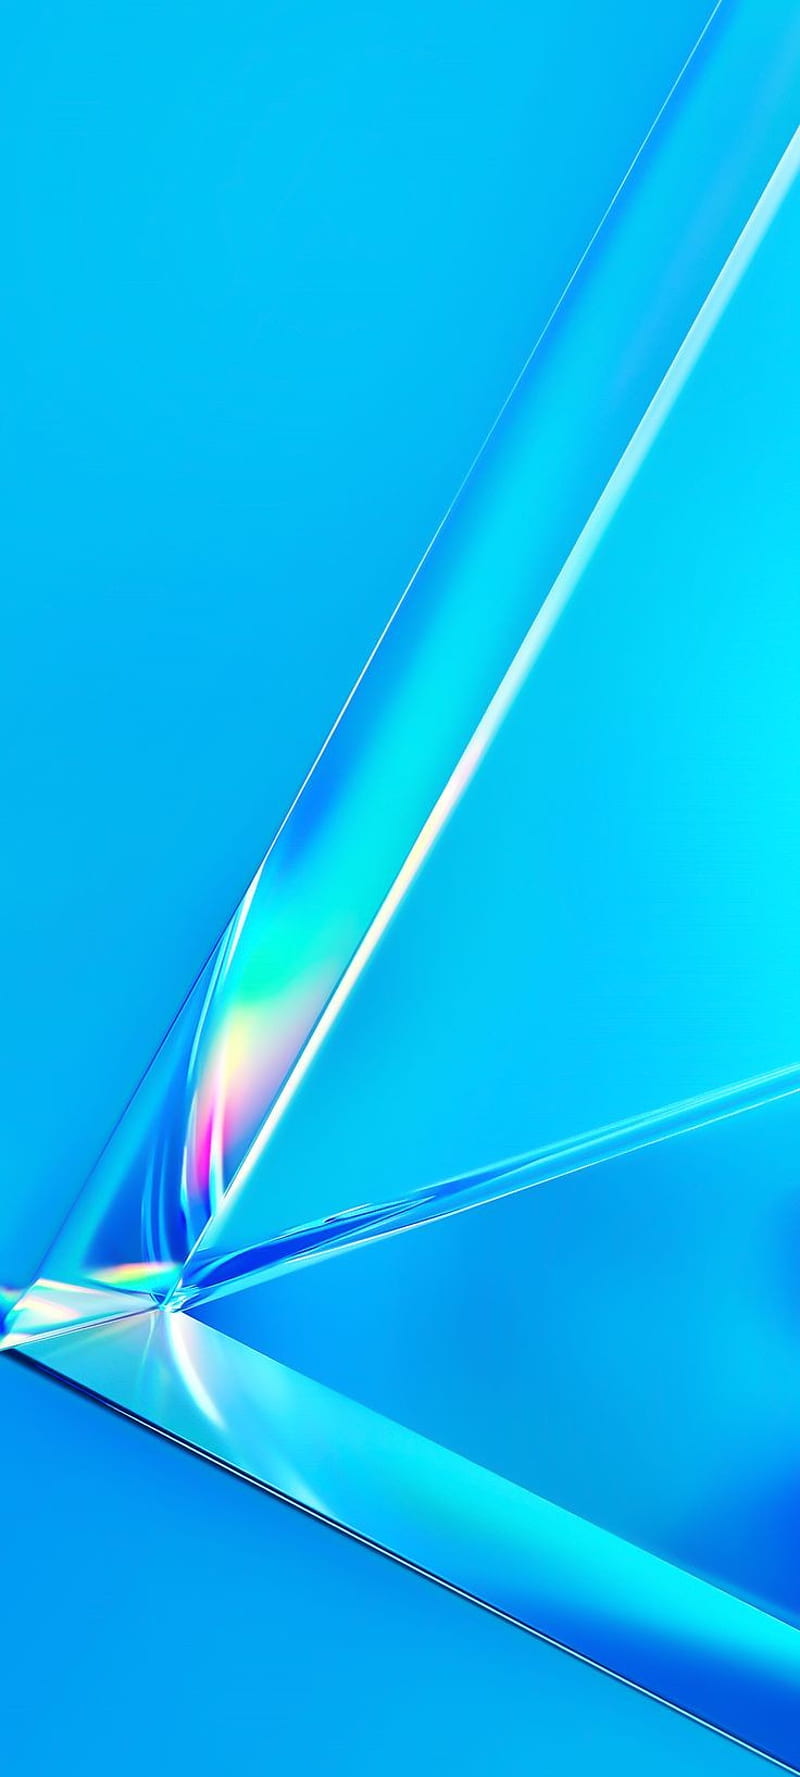 Download Oppo F11 Pro Wallpapers FullHD Resolution Official  Oneplus  wallpapers Original iphone wallpaper Abstract iphone wallpaper